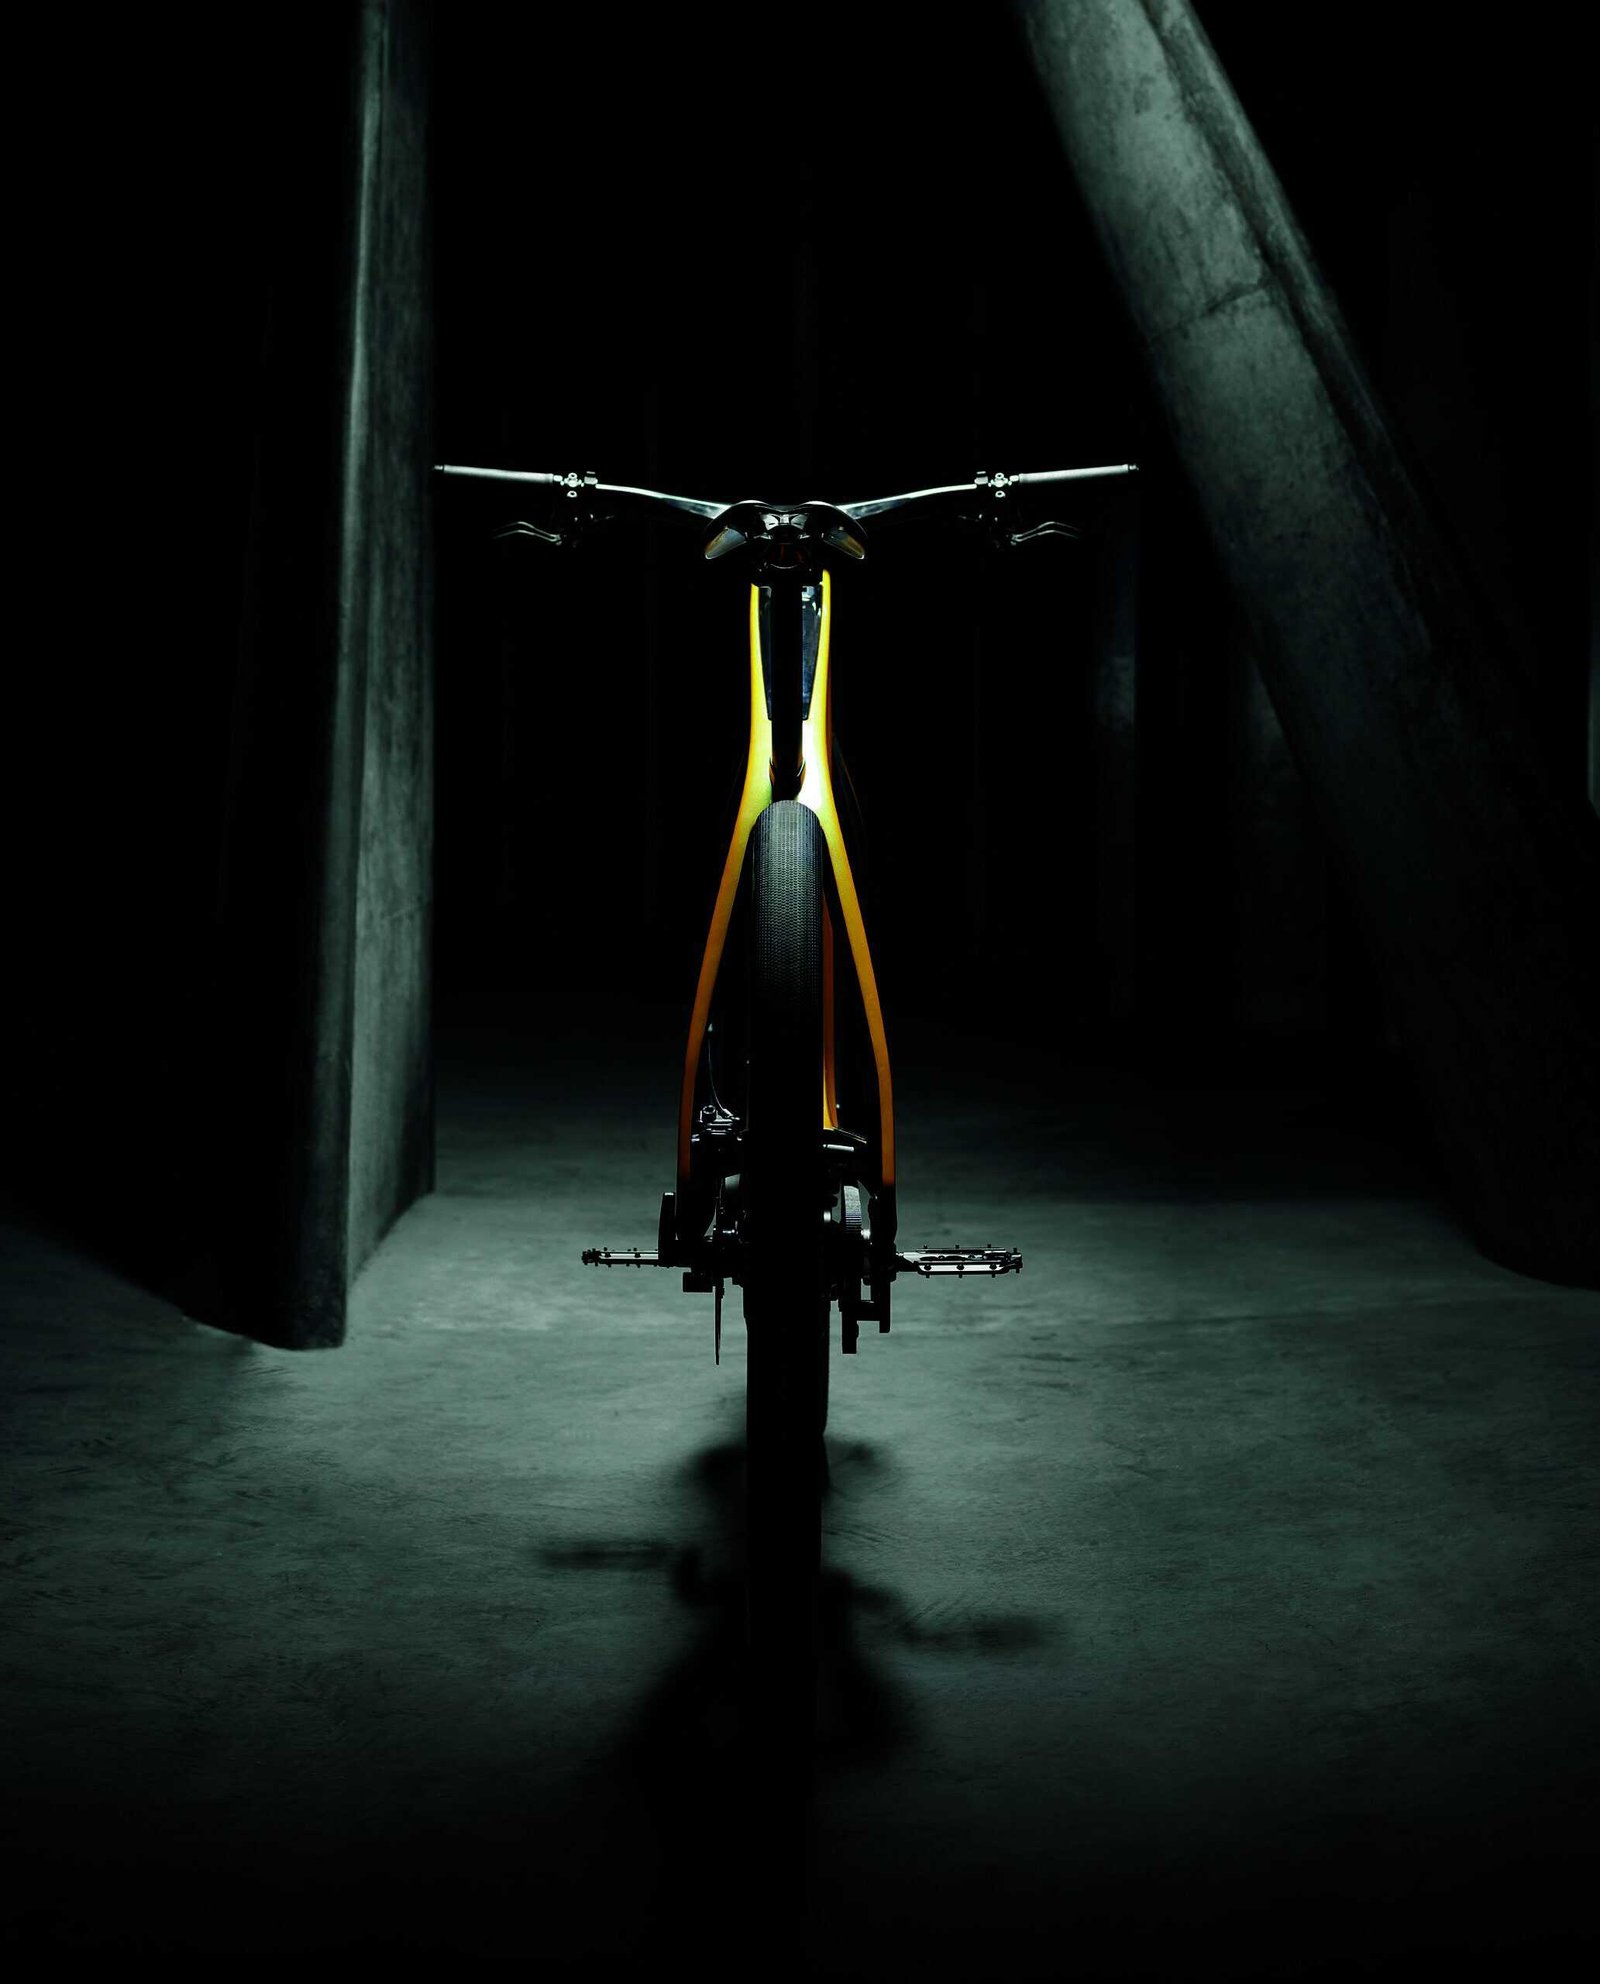 A yellow electric bike parked in a dark room, subtly hinting towards dreams.